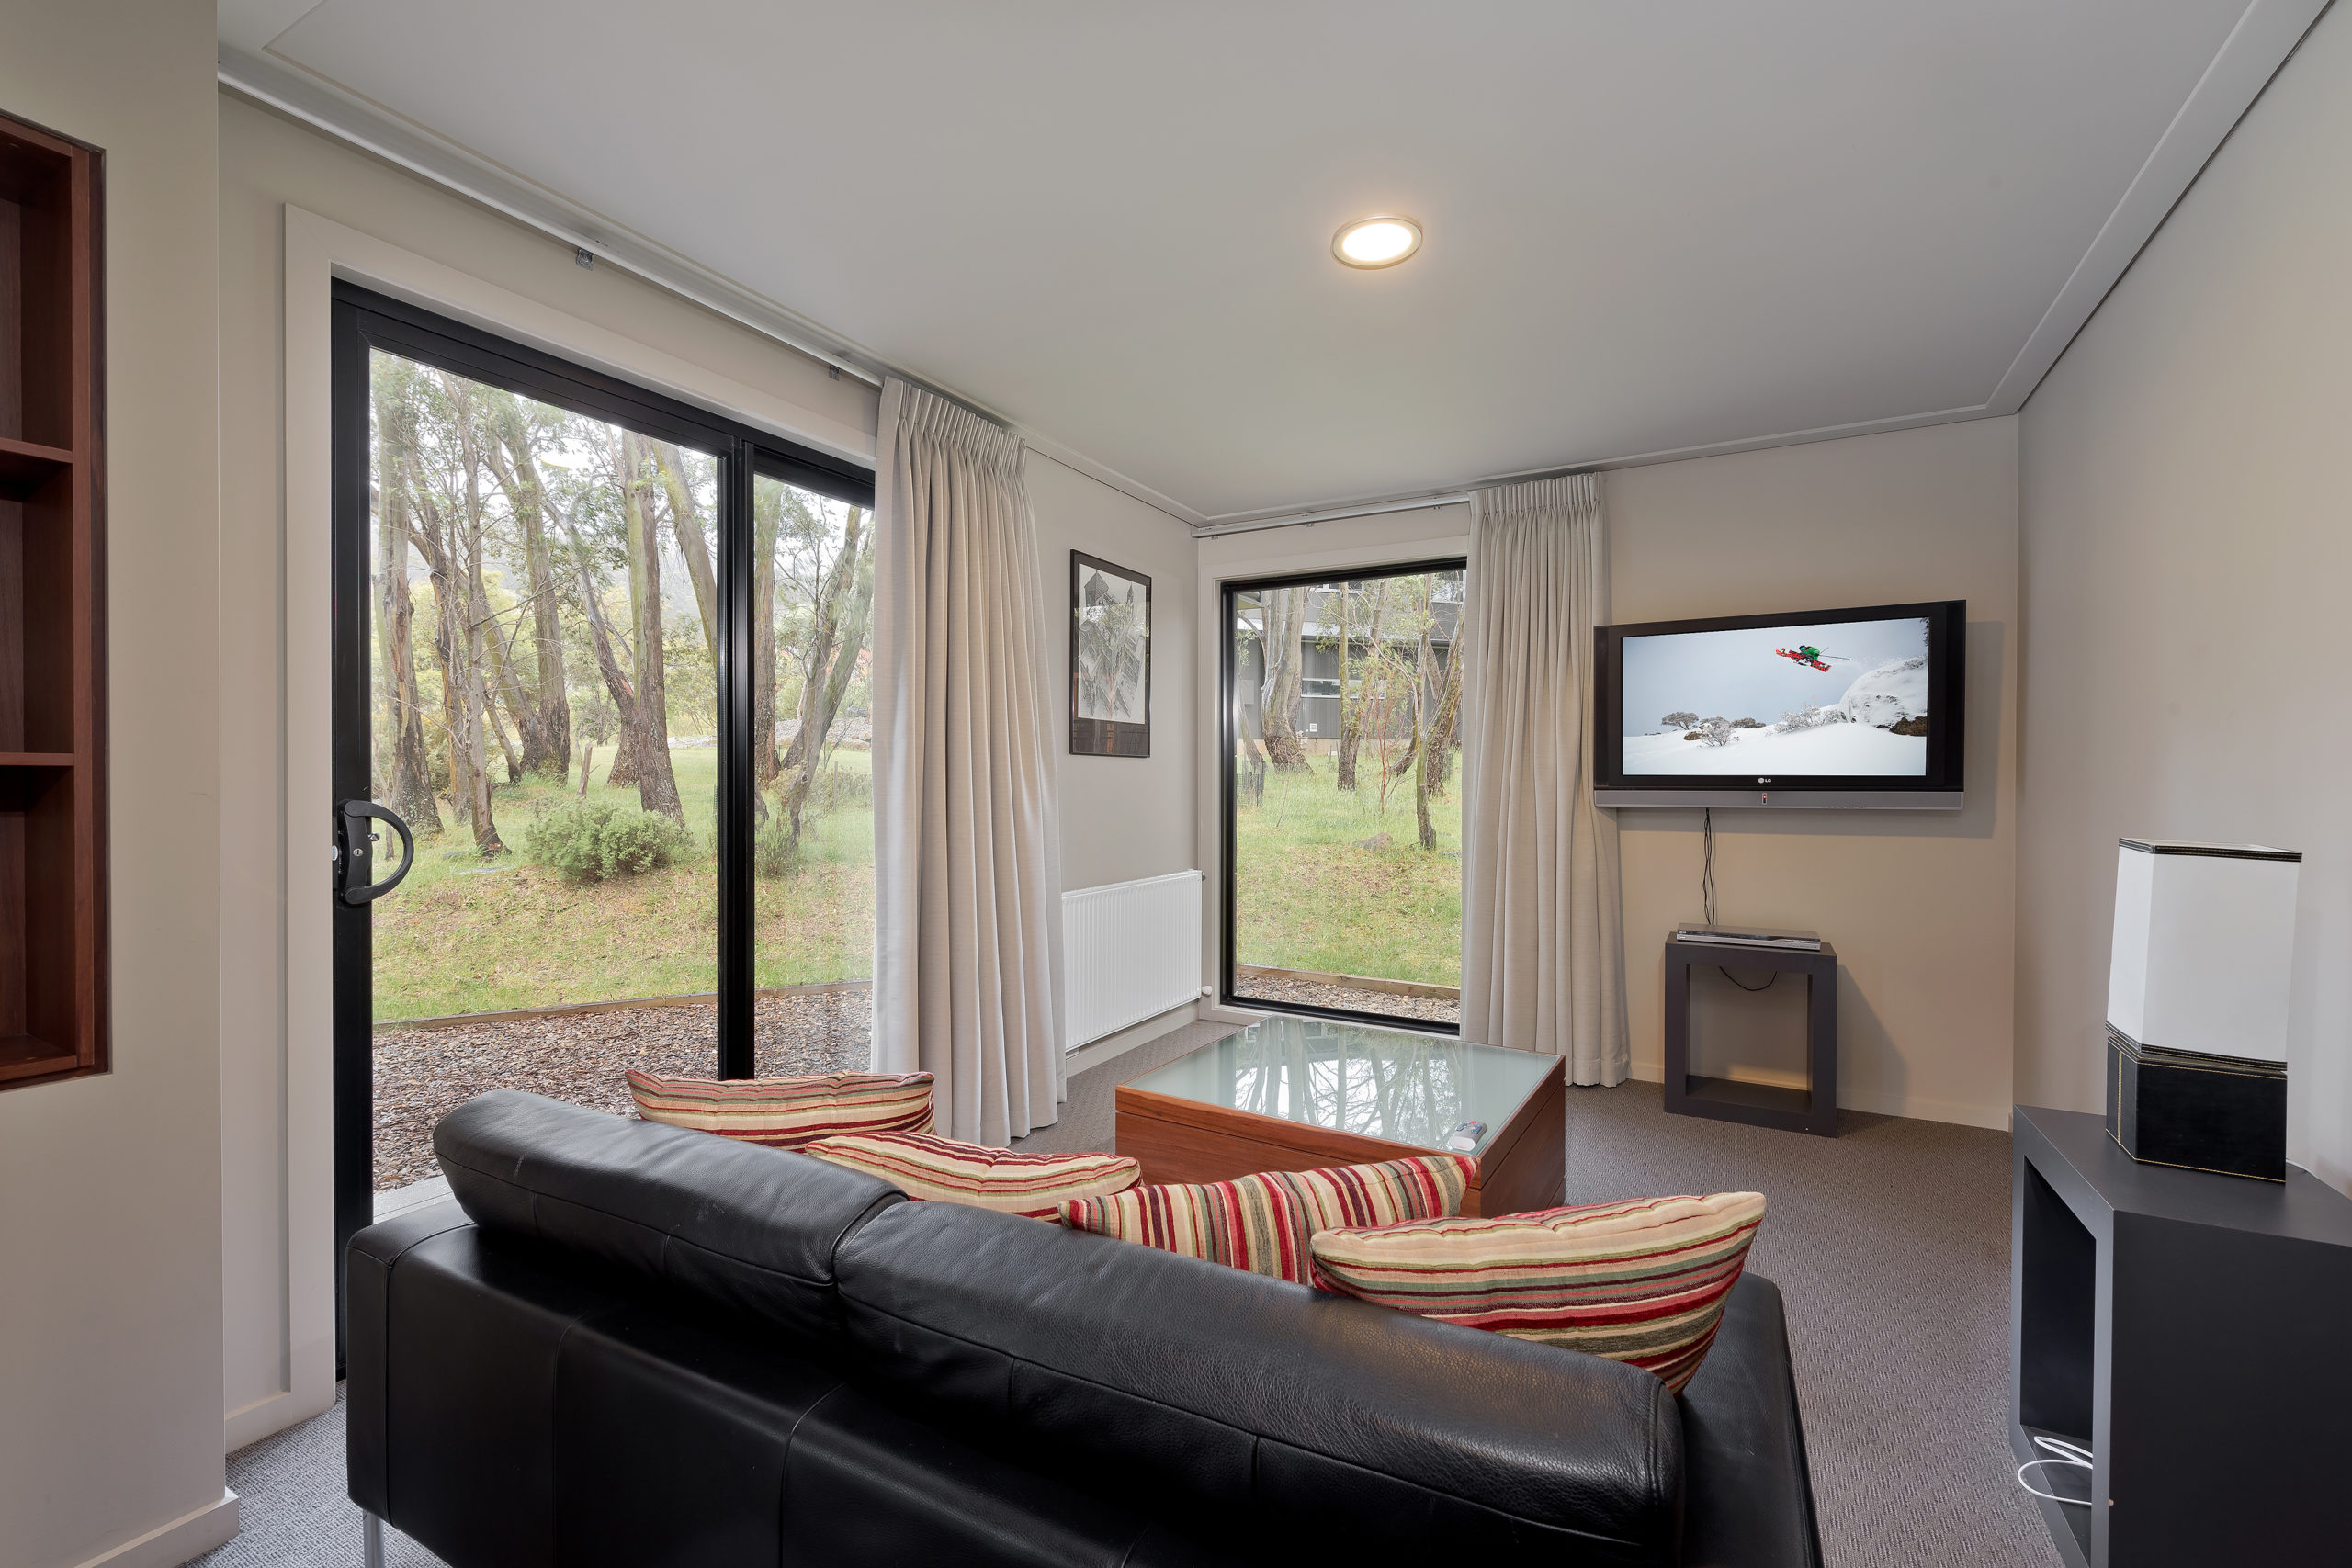 Magnificent Two Storey Fully Furnished 3 Bedroom Chalet at beautiful Lake Crackenback – $1,450,000